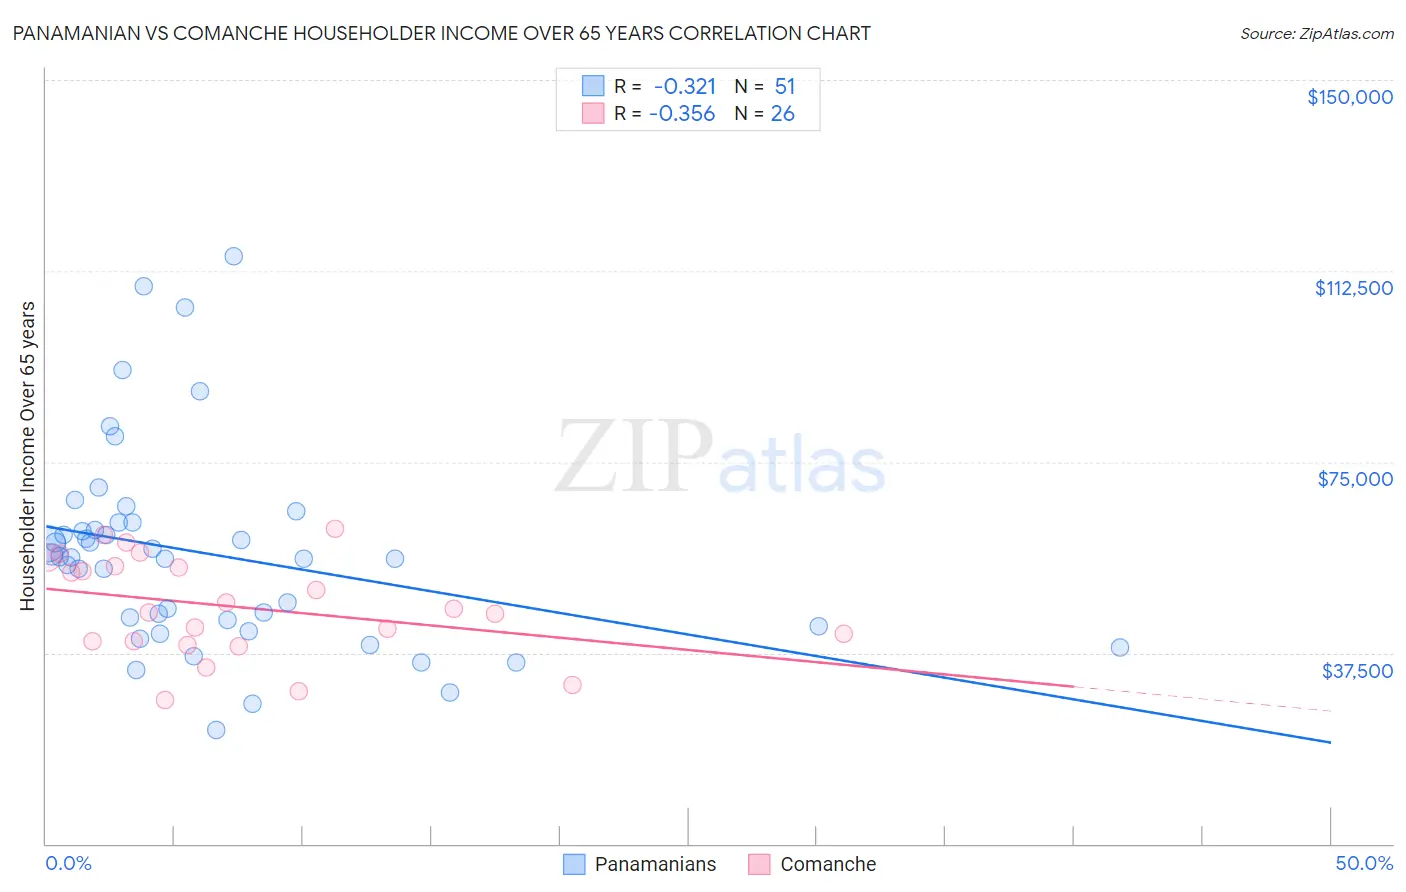 Panamanian vs Comanche Householder Income Over 65 years